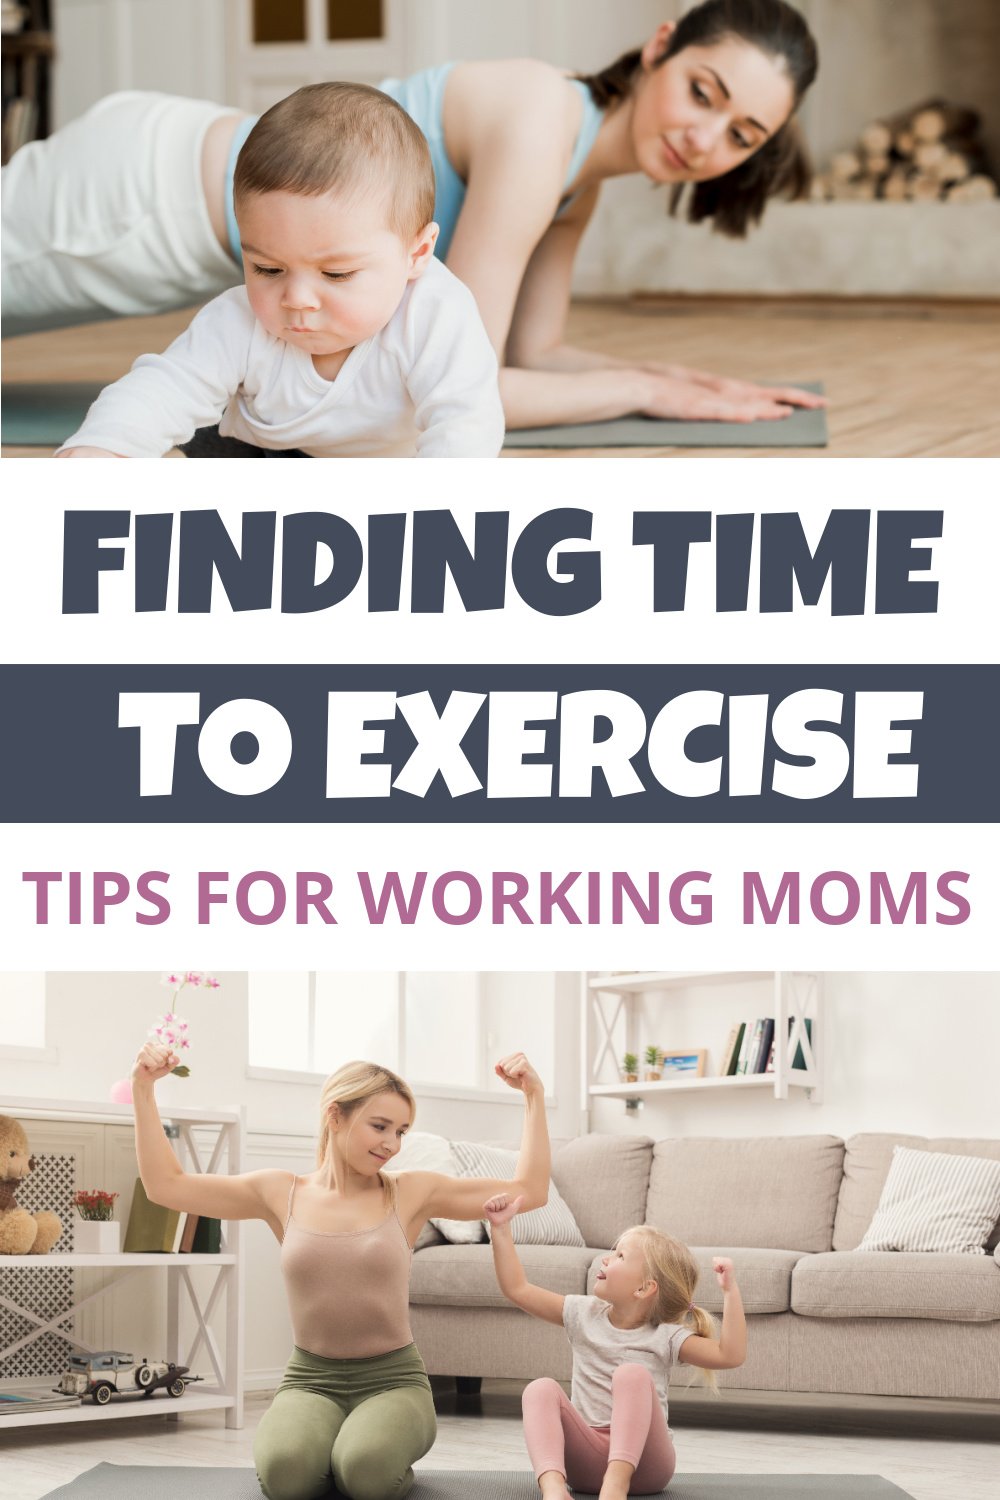 How to find time to workout as a working mom